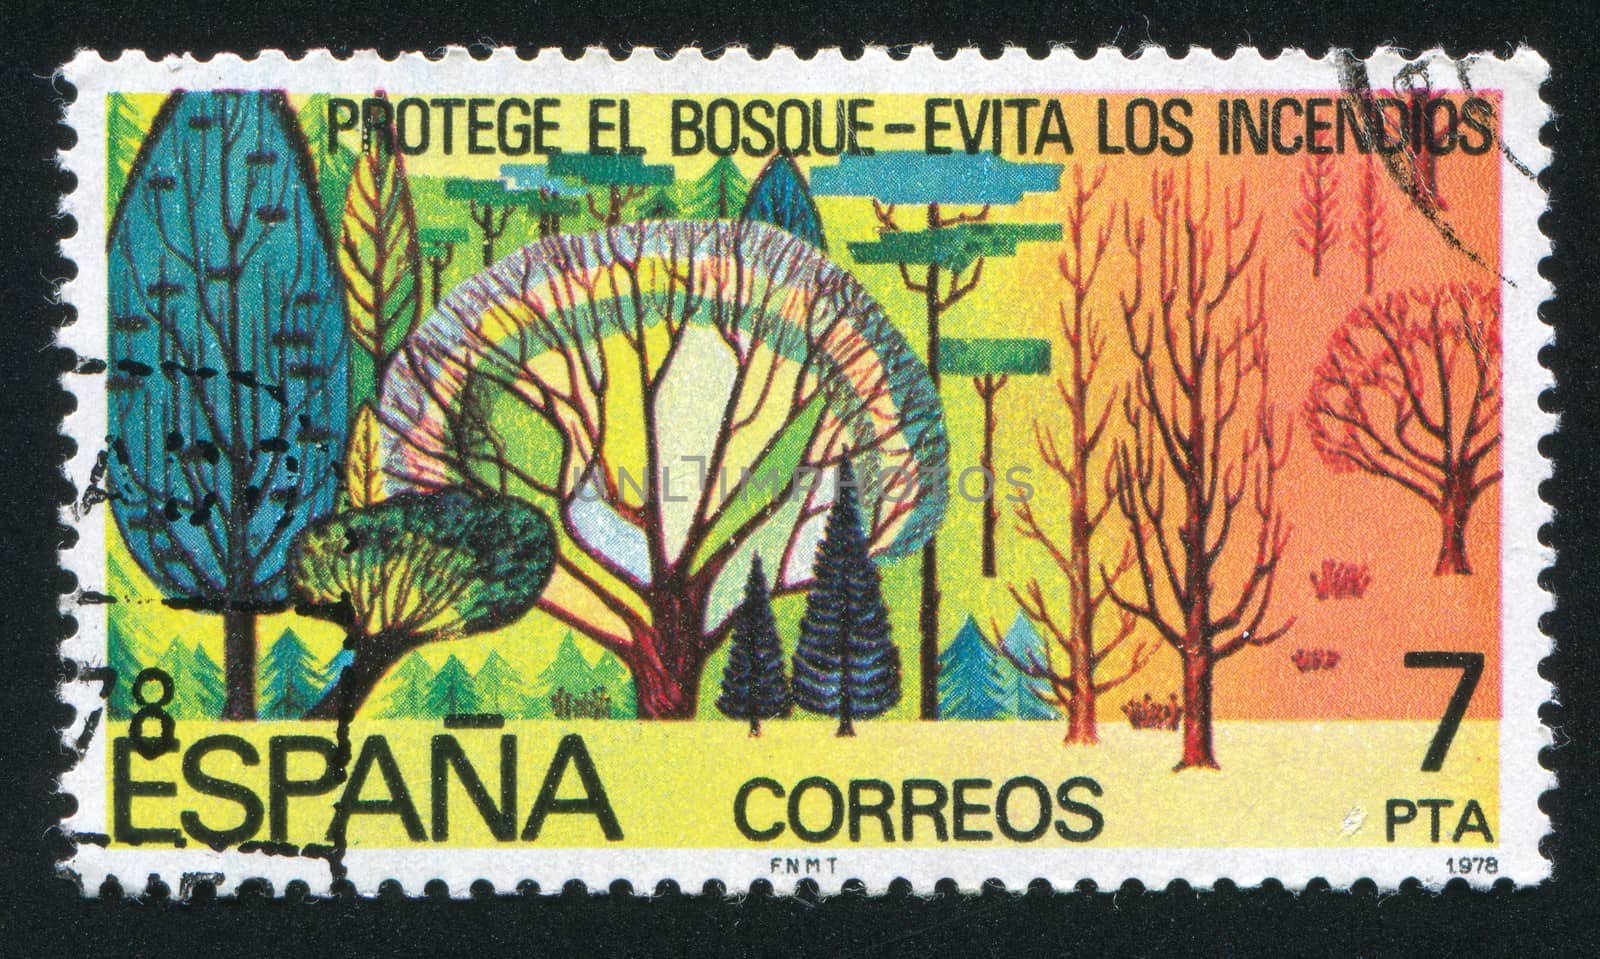 SPAIN - CIRCA 1978: stamp printed by Spain, shows Forest and Forest Destroyed by Fire, circa 1978